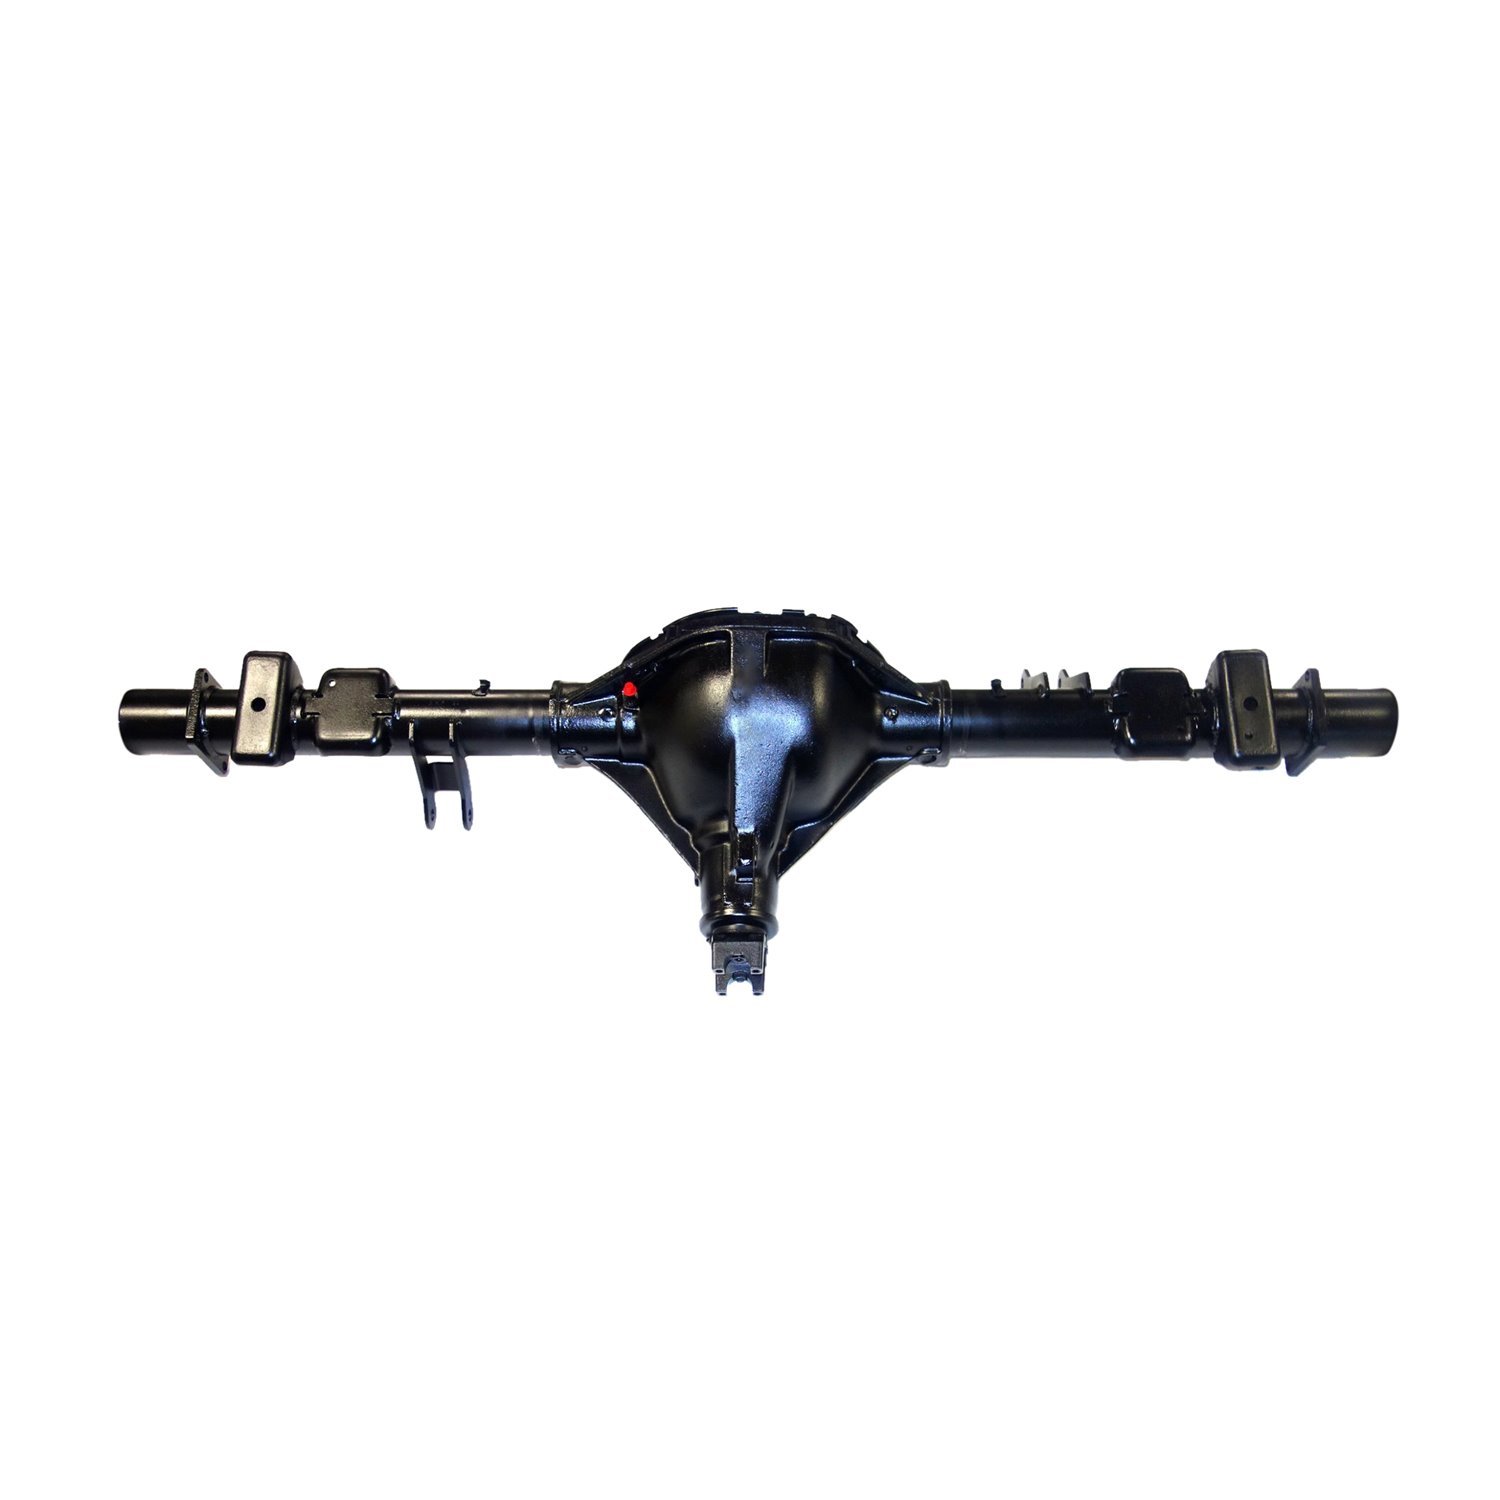 Remanufactured Complete Axle Assy for GM 9.5" 1994 GM Suburban 1500 3.42 , 4x4, Posi LSD